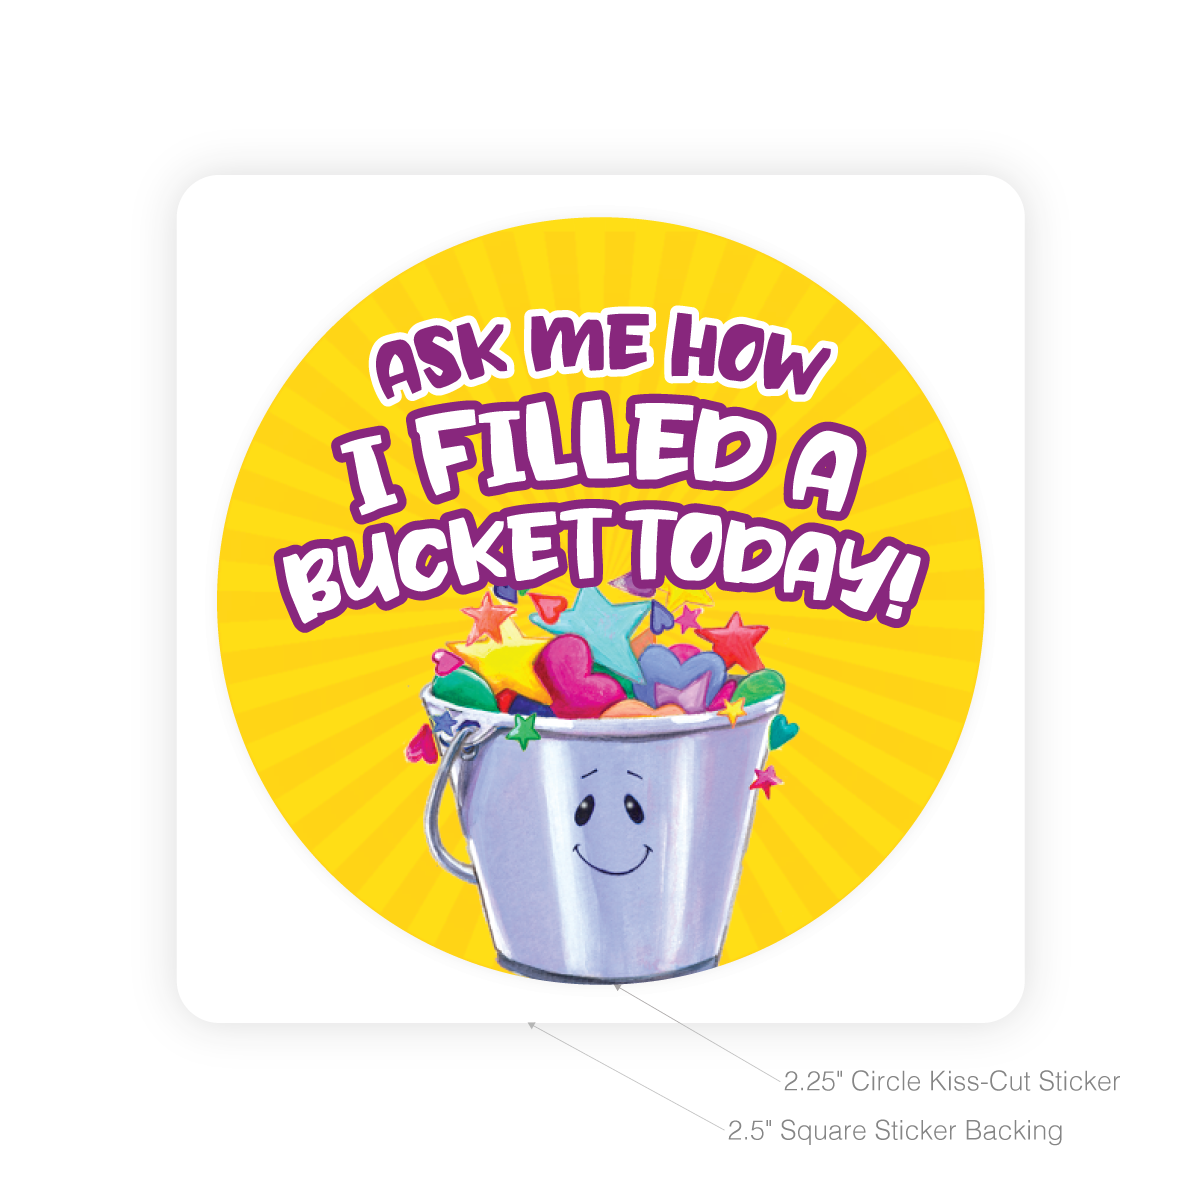 Round Sticker - Ask me how I Filled a Bucket today!